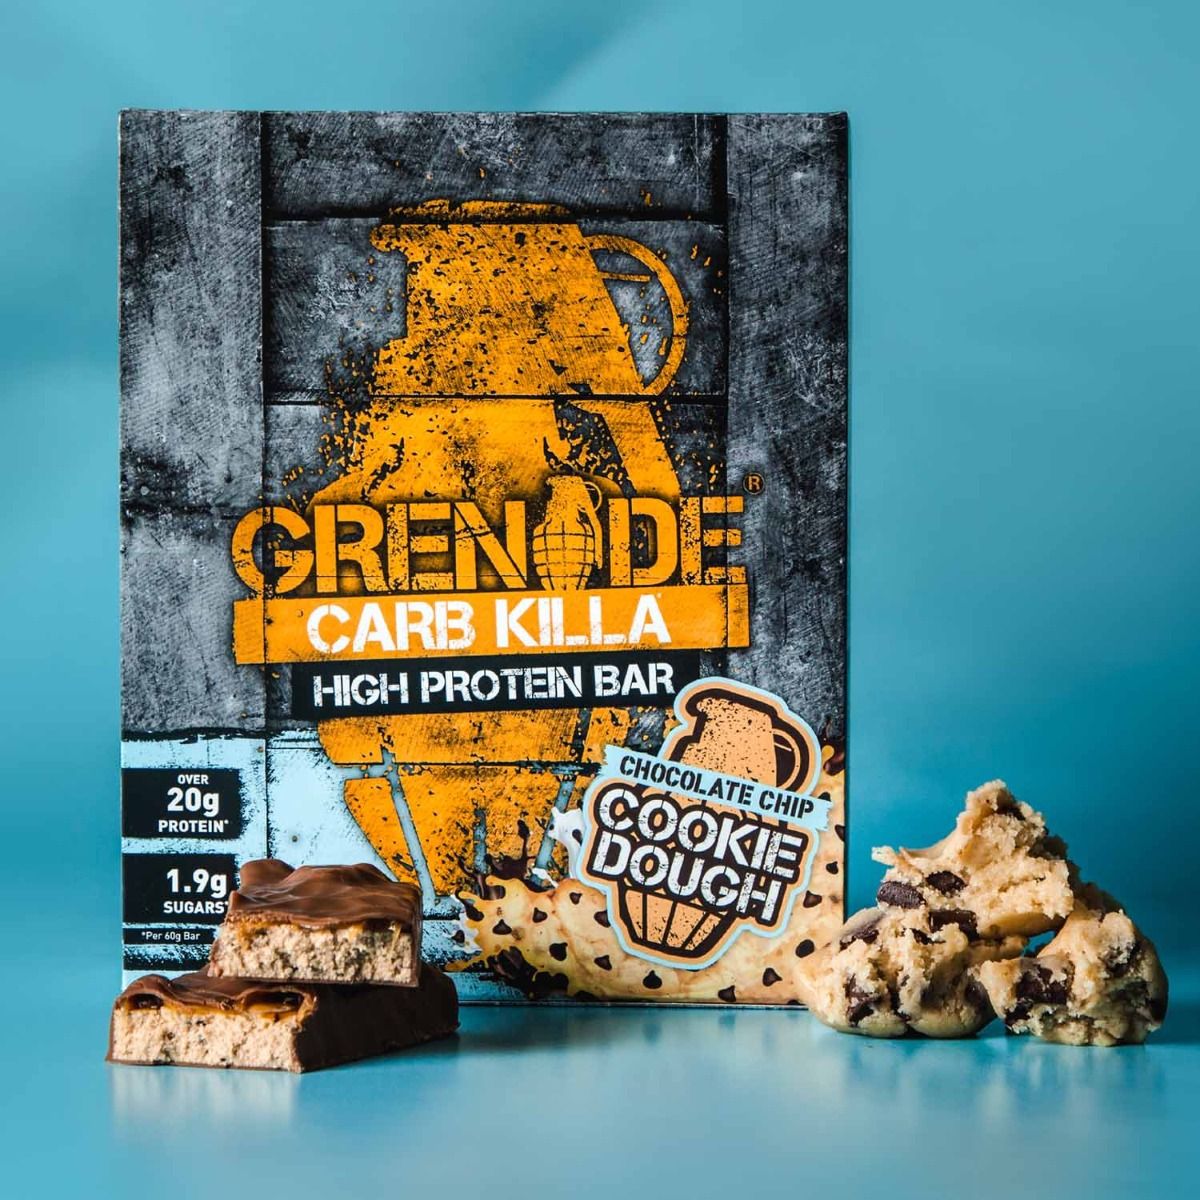 Grenade Carb Killa Chocolate Chip Cookie Dough High Protein Bar, 60 gm, Pack of 1 